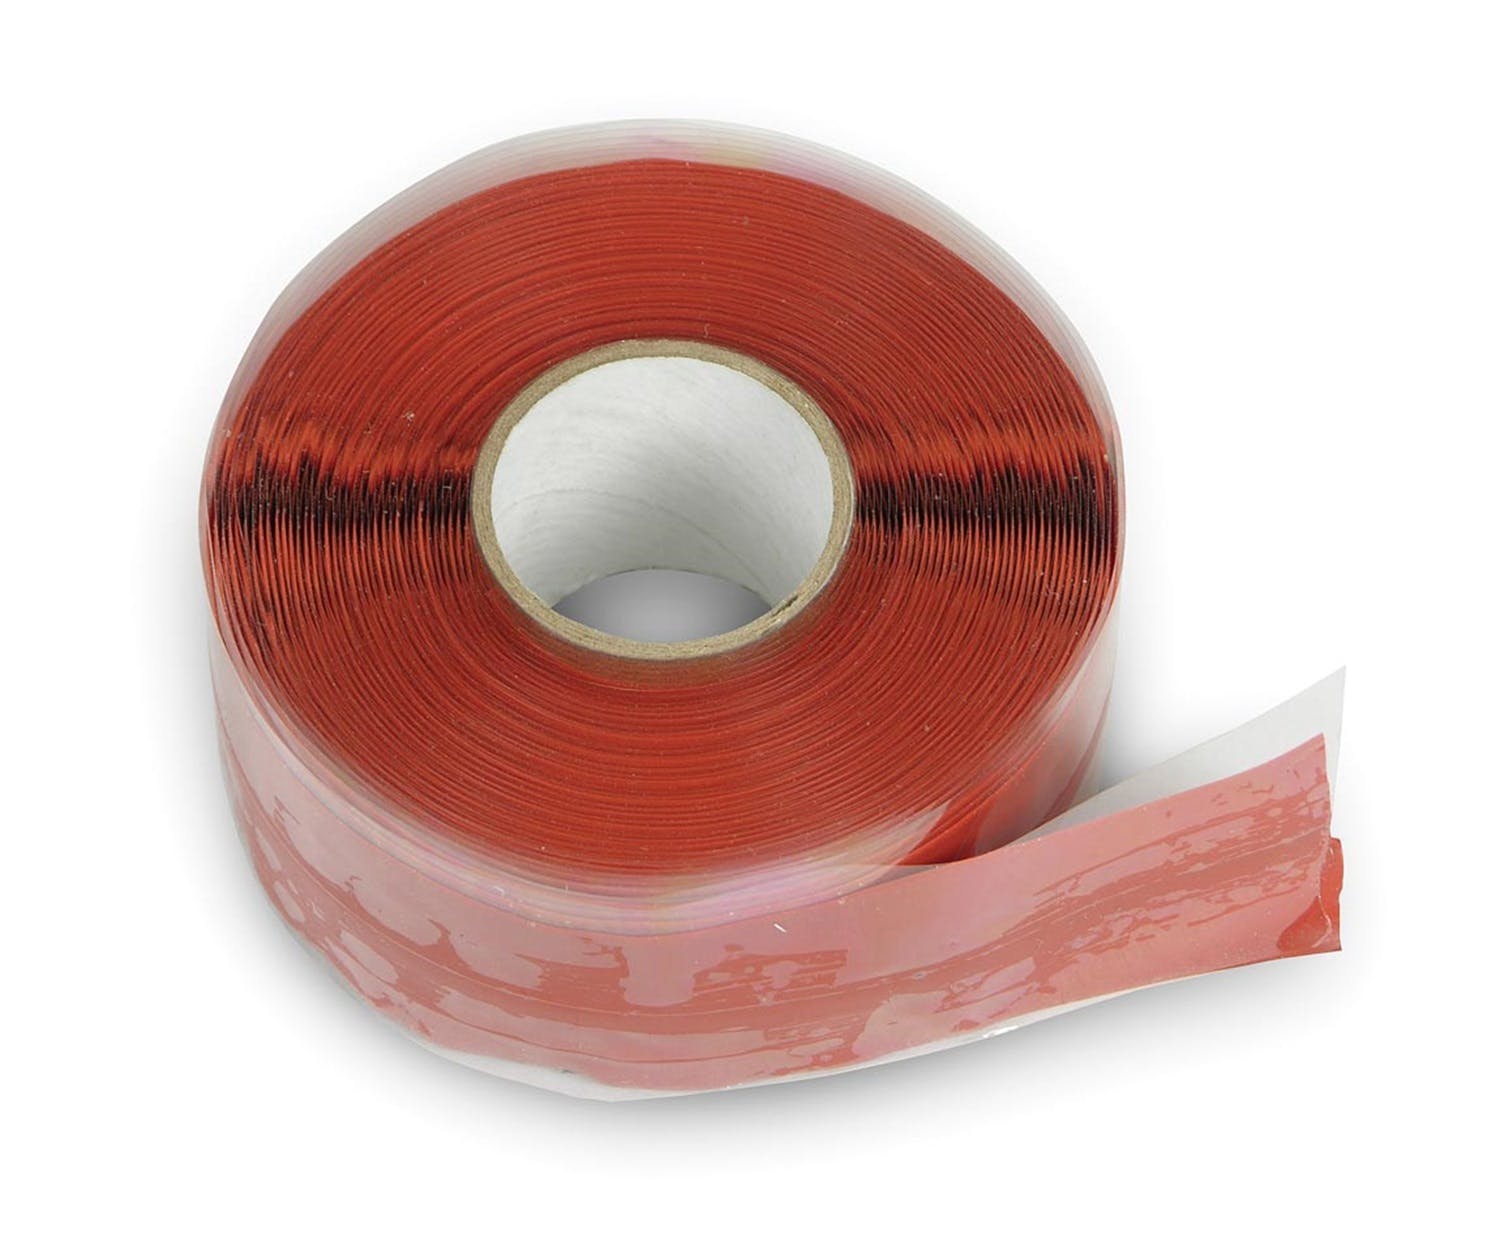 Earl's Performance Plumbing 731001ERL FLAME GUARD TAPE 1 X 12 FT ROLL